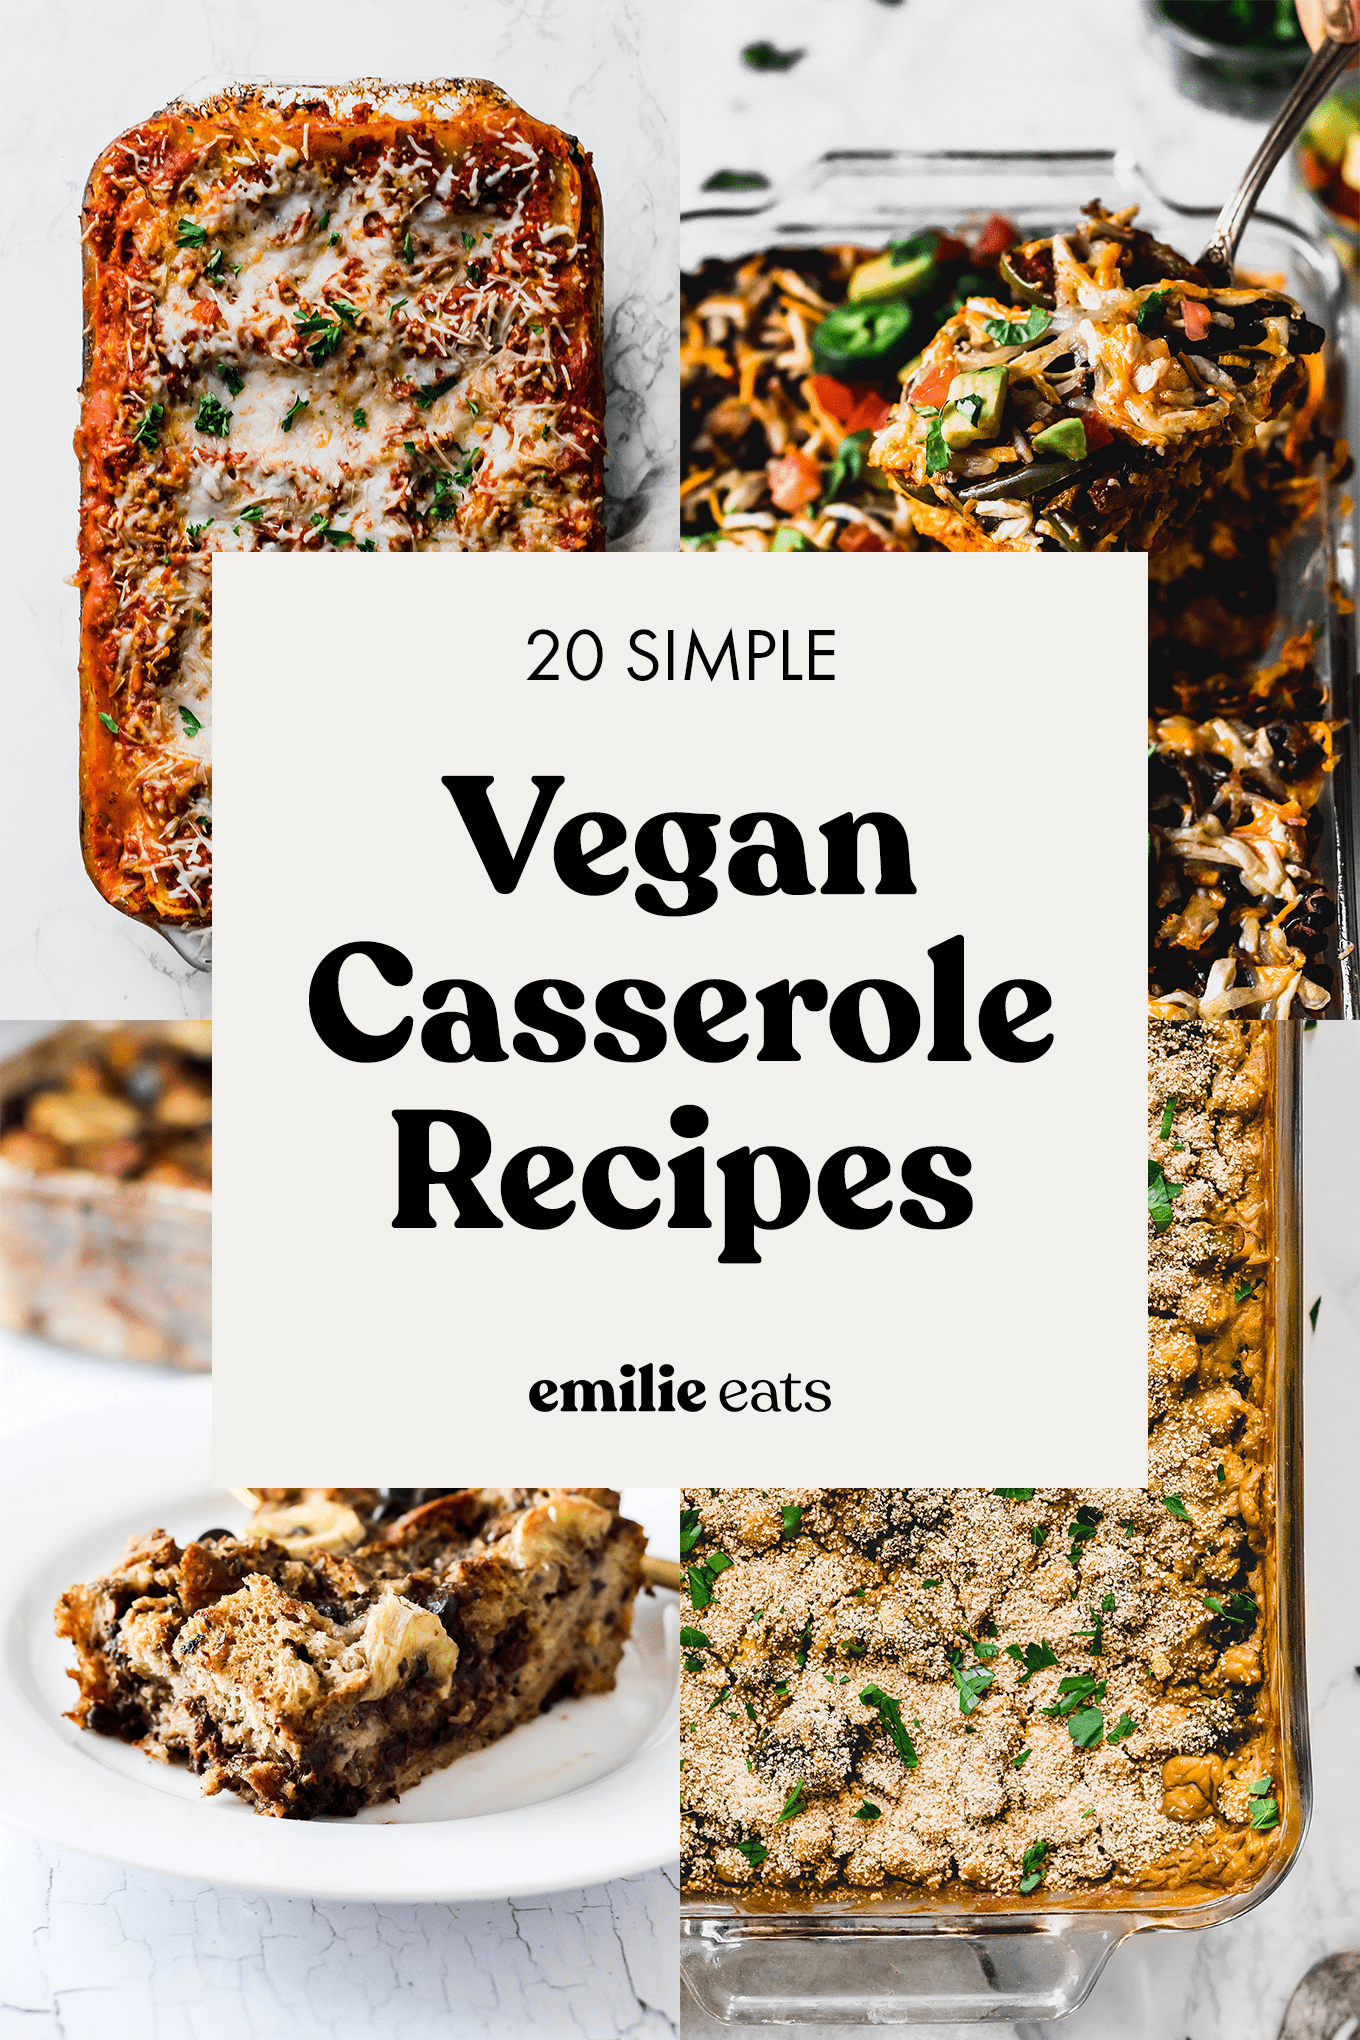 https://www.emilieeats.com/wp-content/uploads/2021/12/vegan-casserole-recipes-easy-simple-dinner-meal-ideas-hero.png